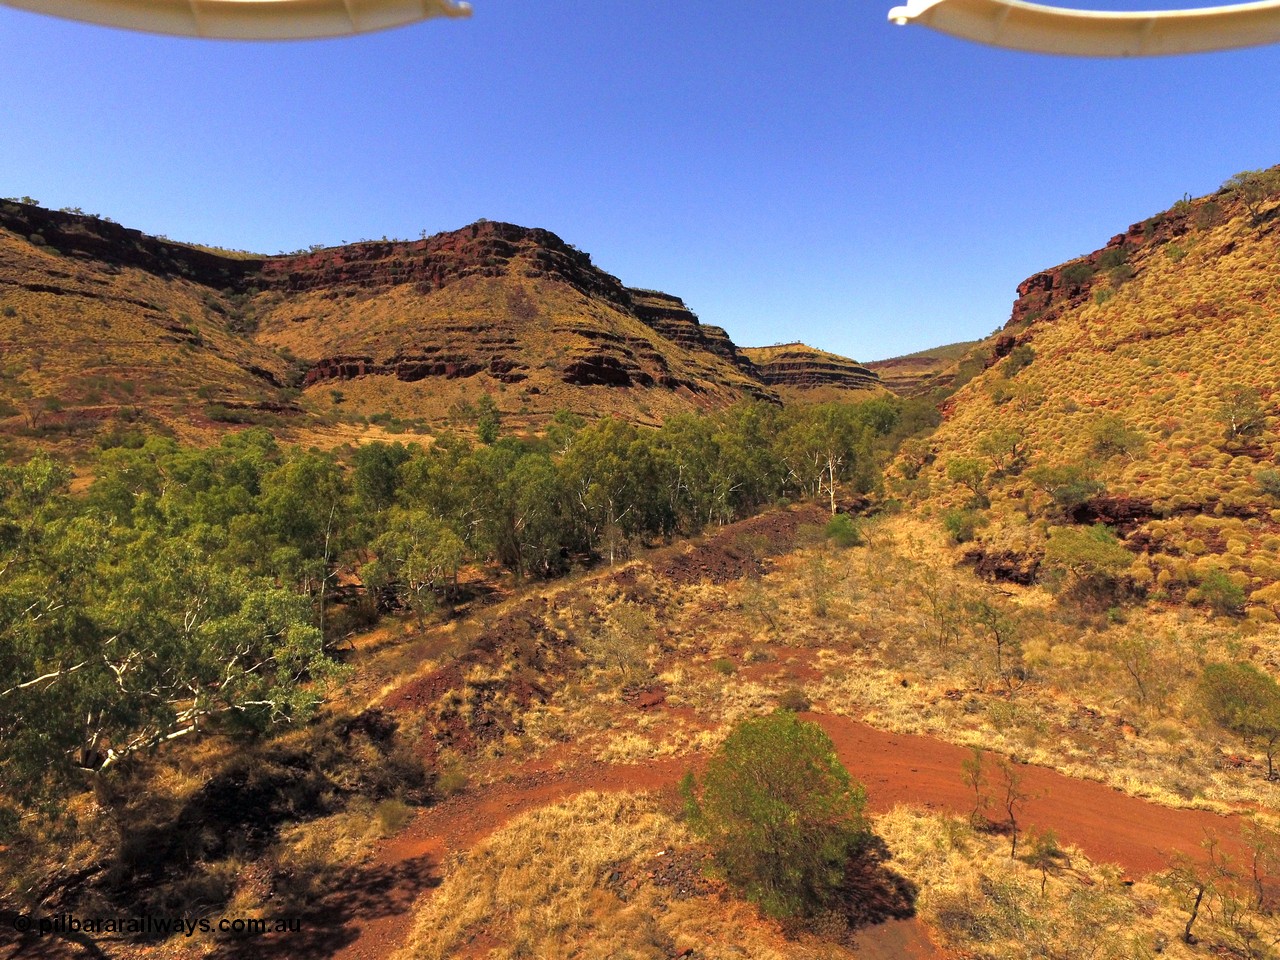 160101 DJI 0008
Wittenoom Gorge, at the end of Bolitho Rd neat the former settlement looking south west towards the Gorge Mine, power station was located on cut to the left above the tree line. [url=https://goo.gl/maps/AE2xJrLCw5Lwubnc6]Geodata[/url].
